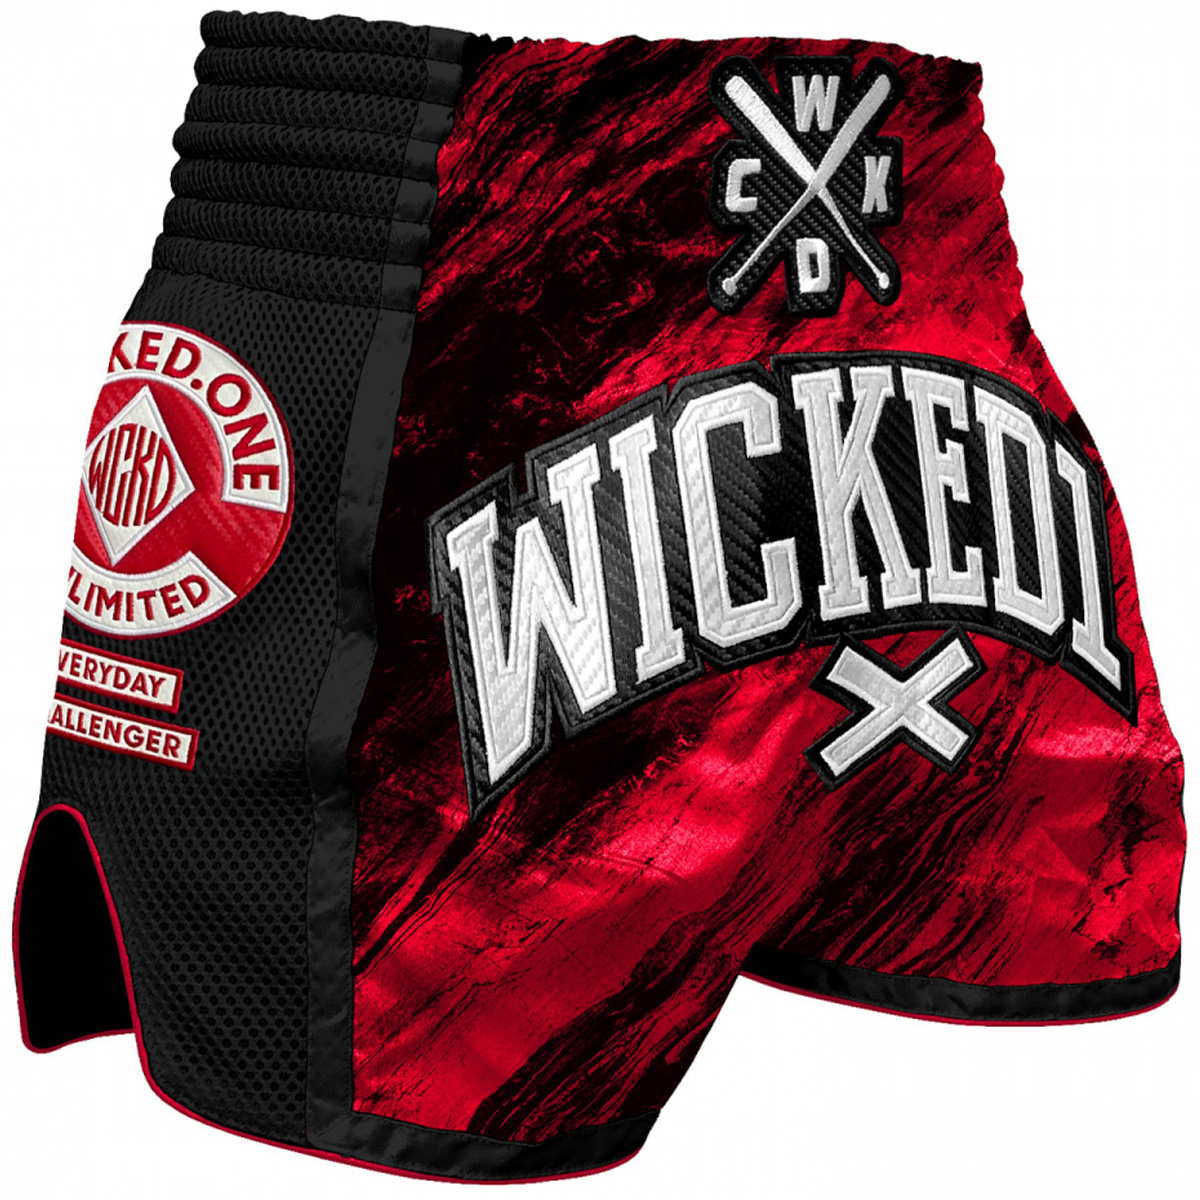 Short boxe Thaï Wicked One muay Thaï conflict - Rouge